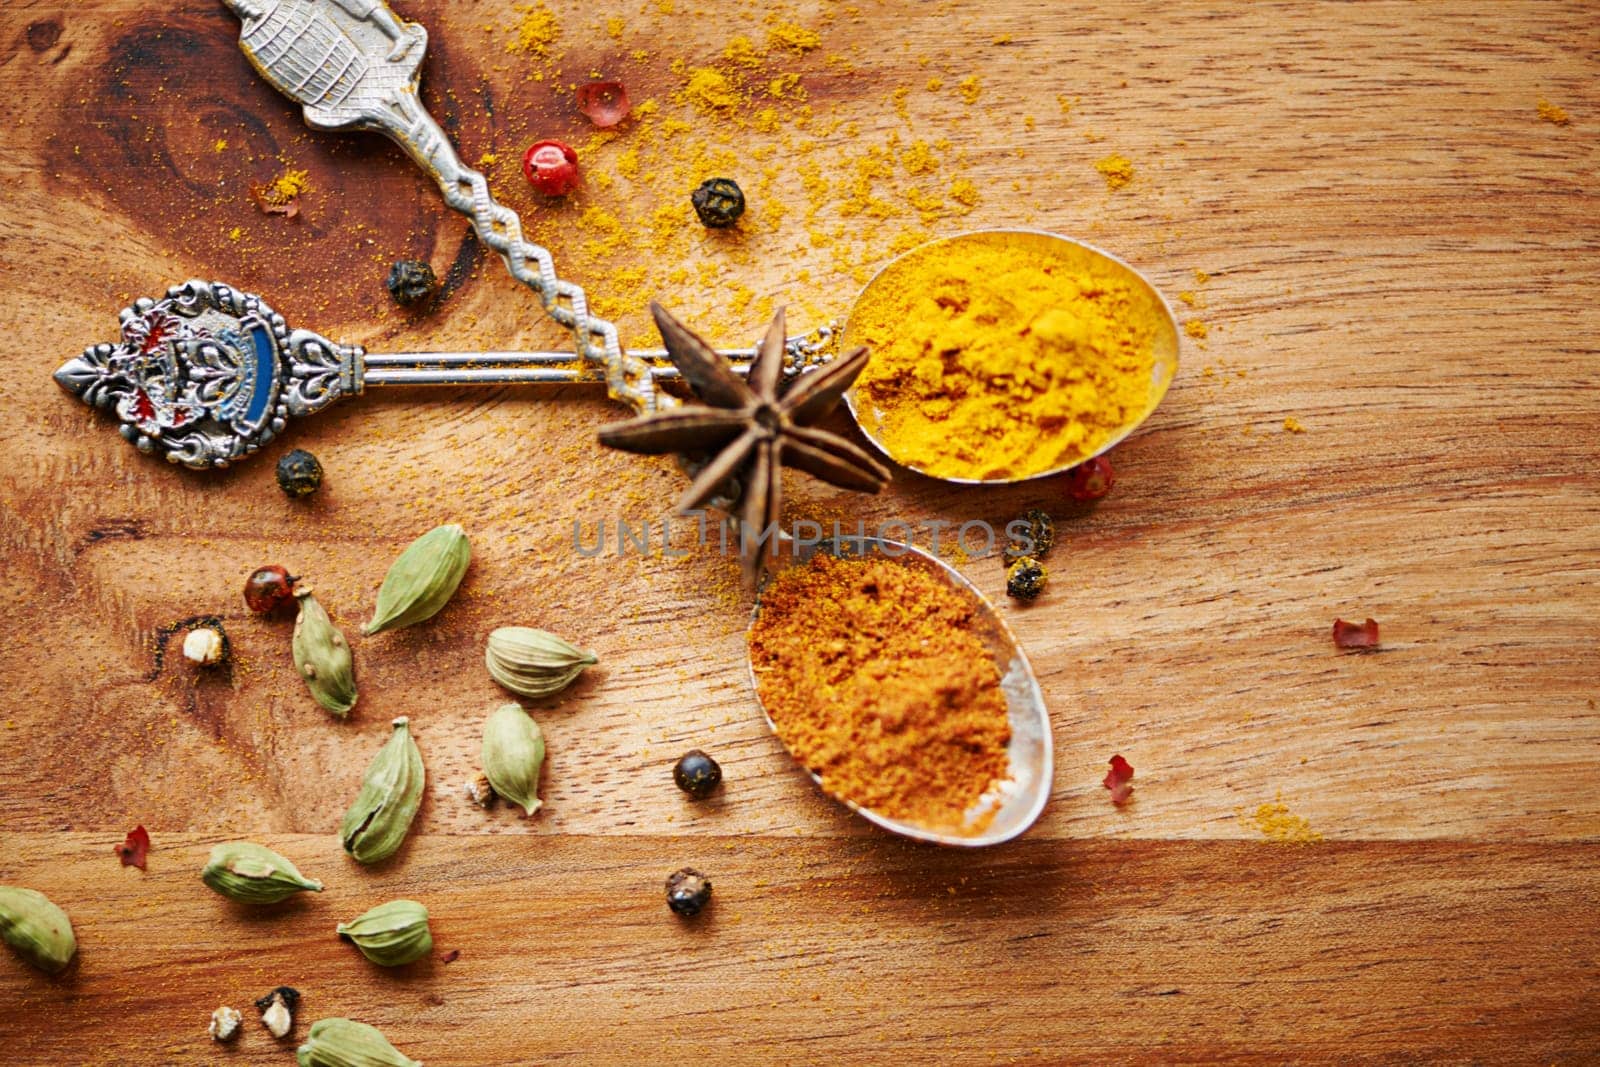 Spoons, spice and selection of seasoning for cooking on kitchen table, turmeric and cardamom for meal. Top view, condiments and options for spicy gourmet in Indian culture, art and food preparation.